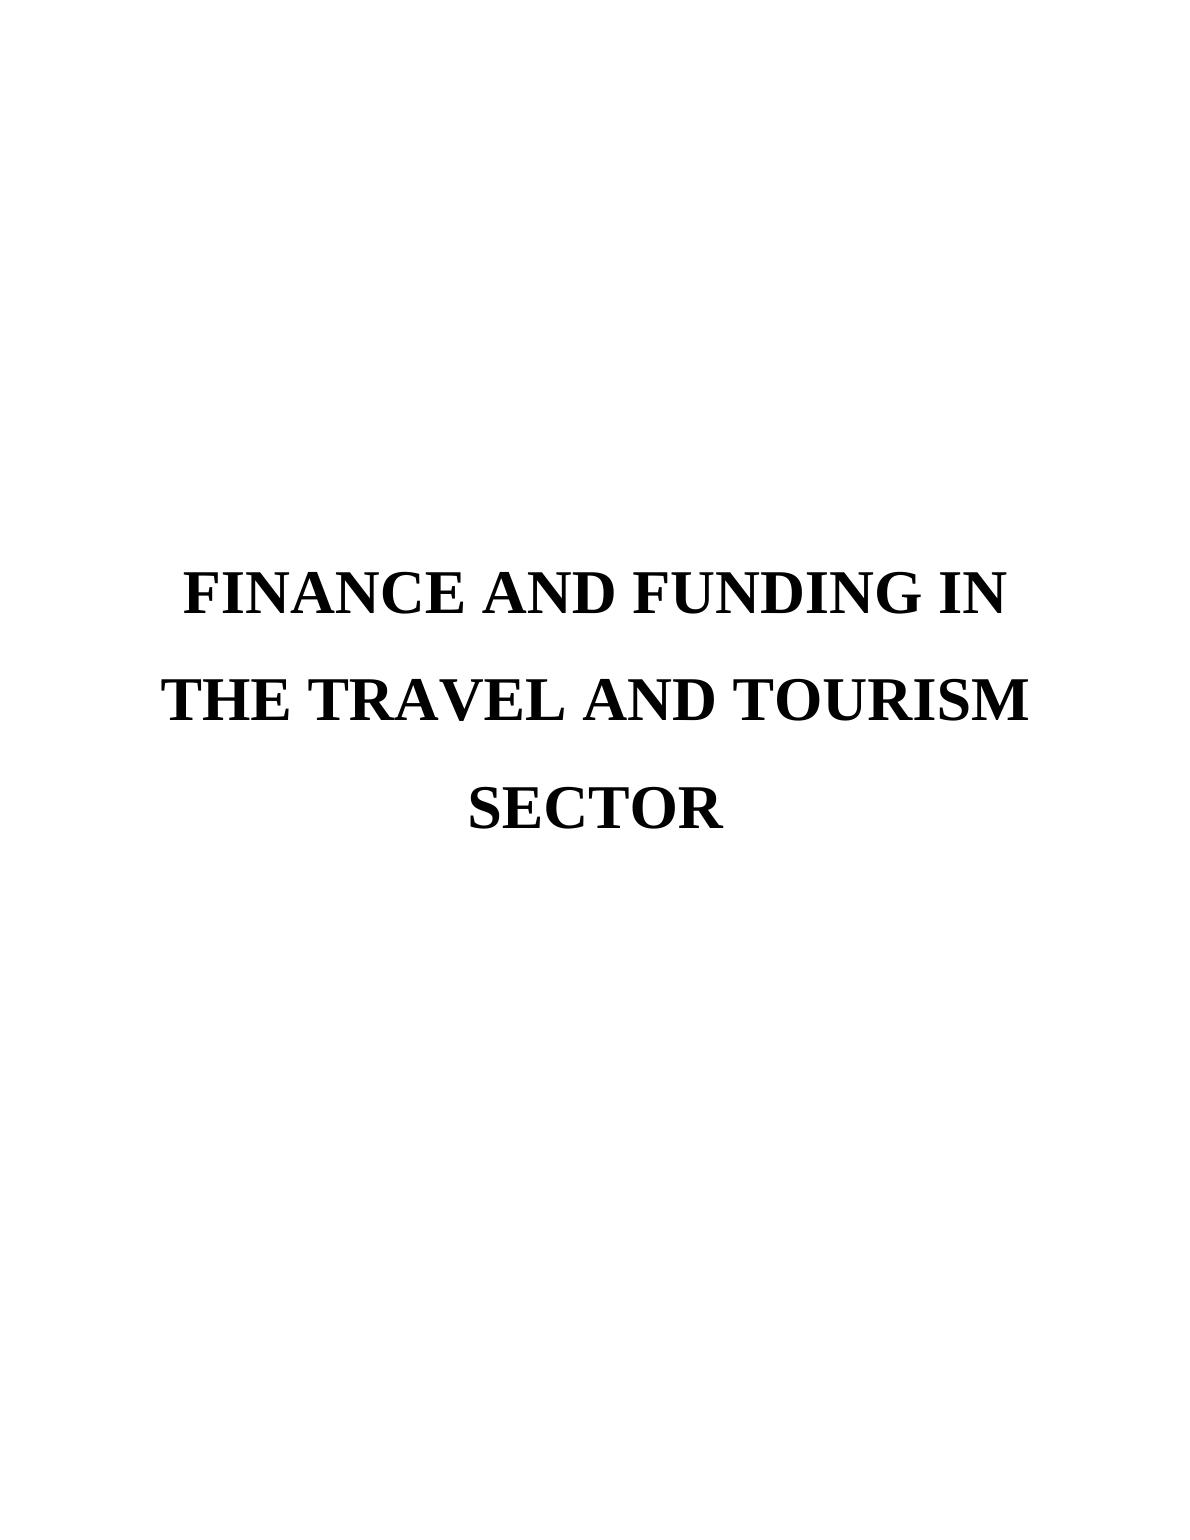 FINANCE AND FUNDING IN THE TRAVEL AND TOURISM SECTOR_1